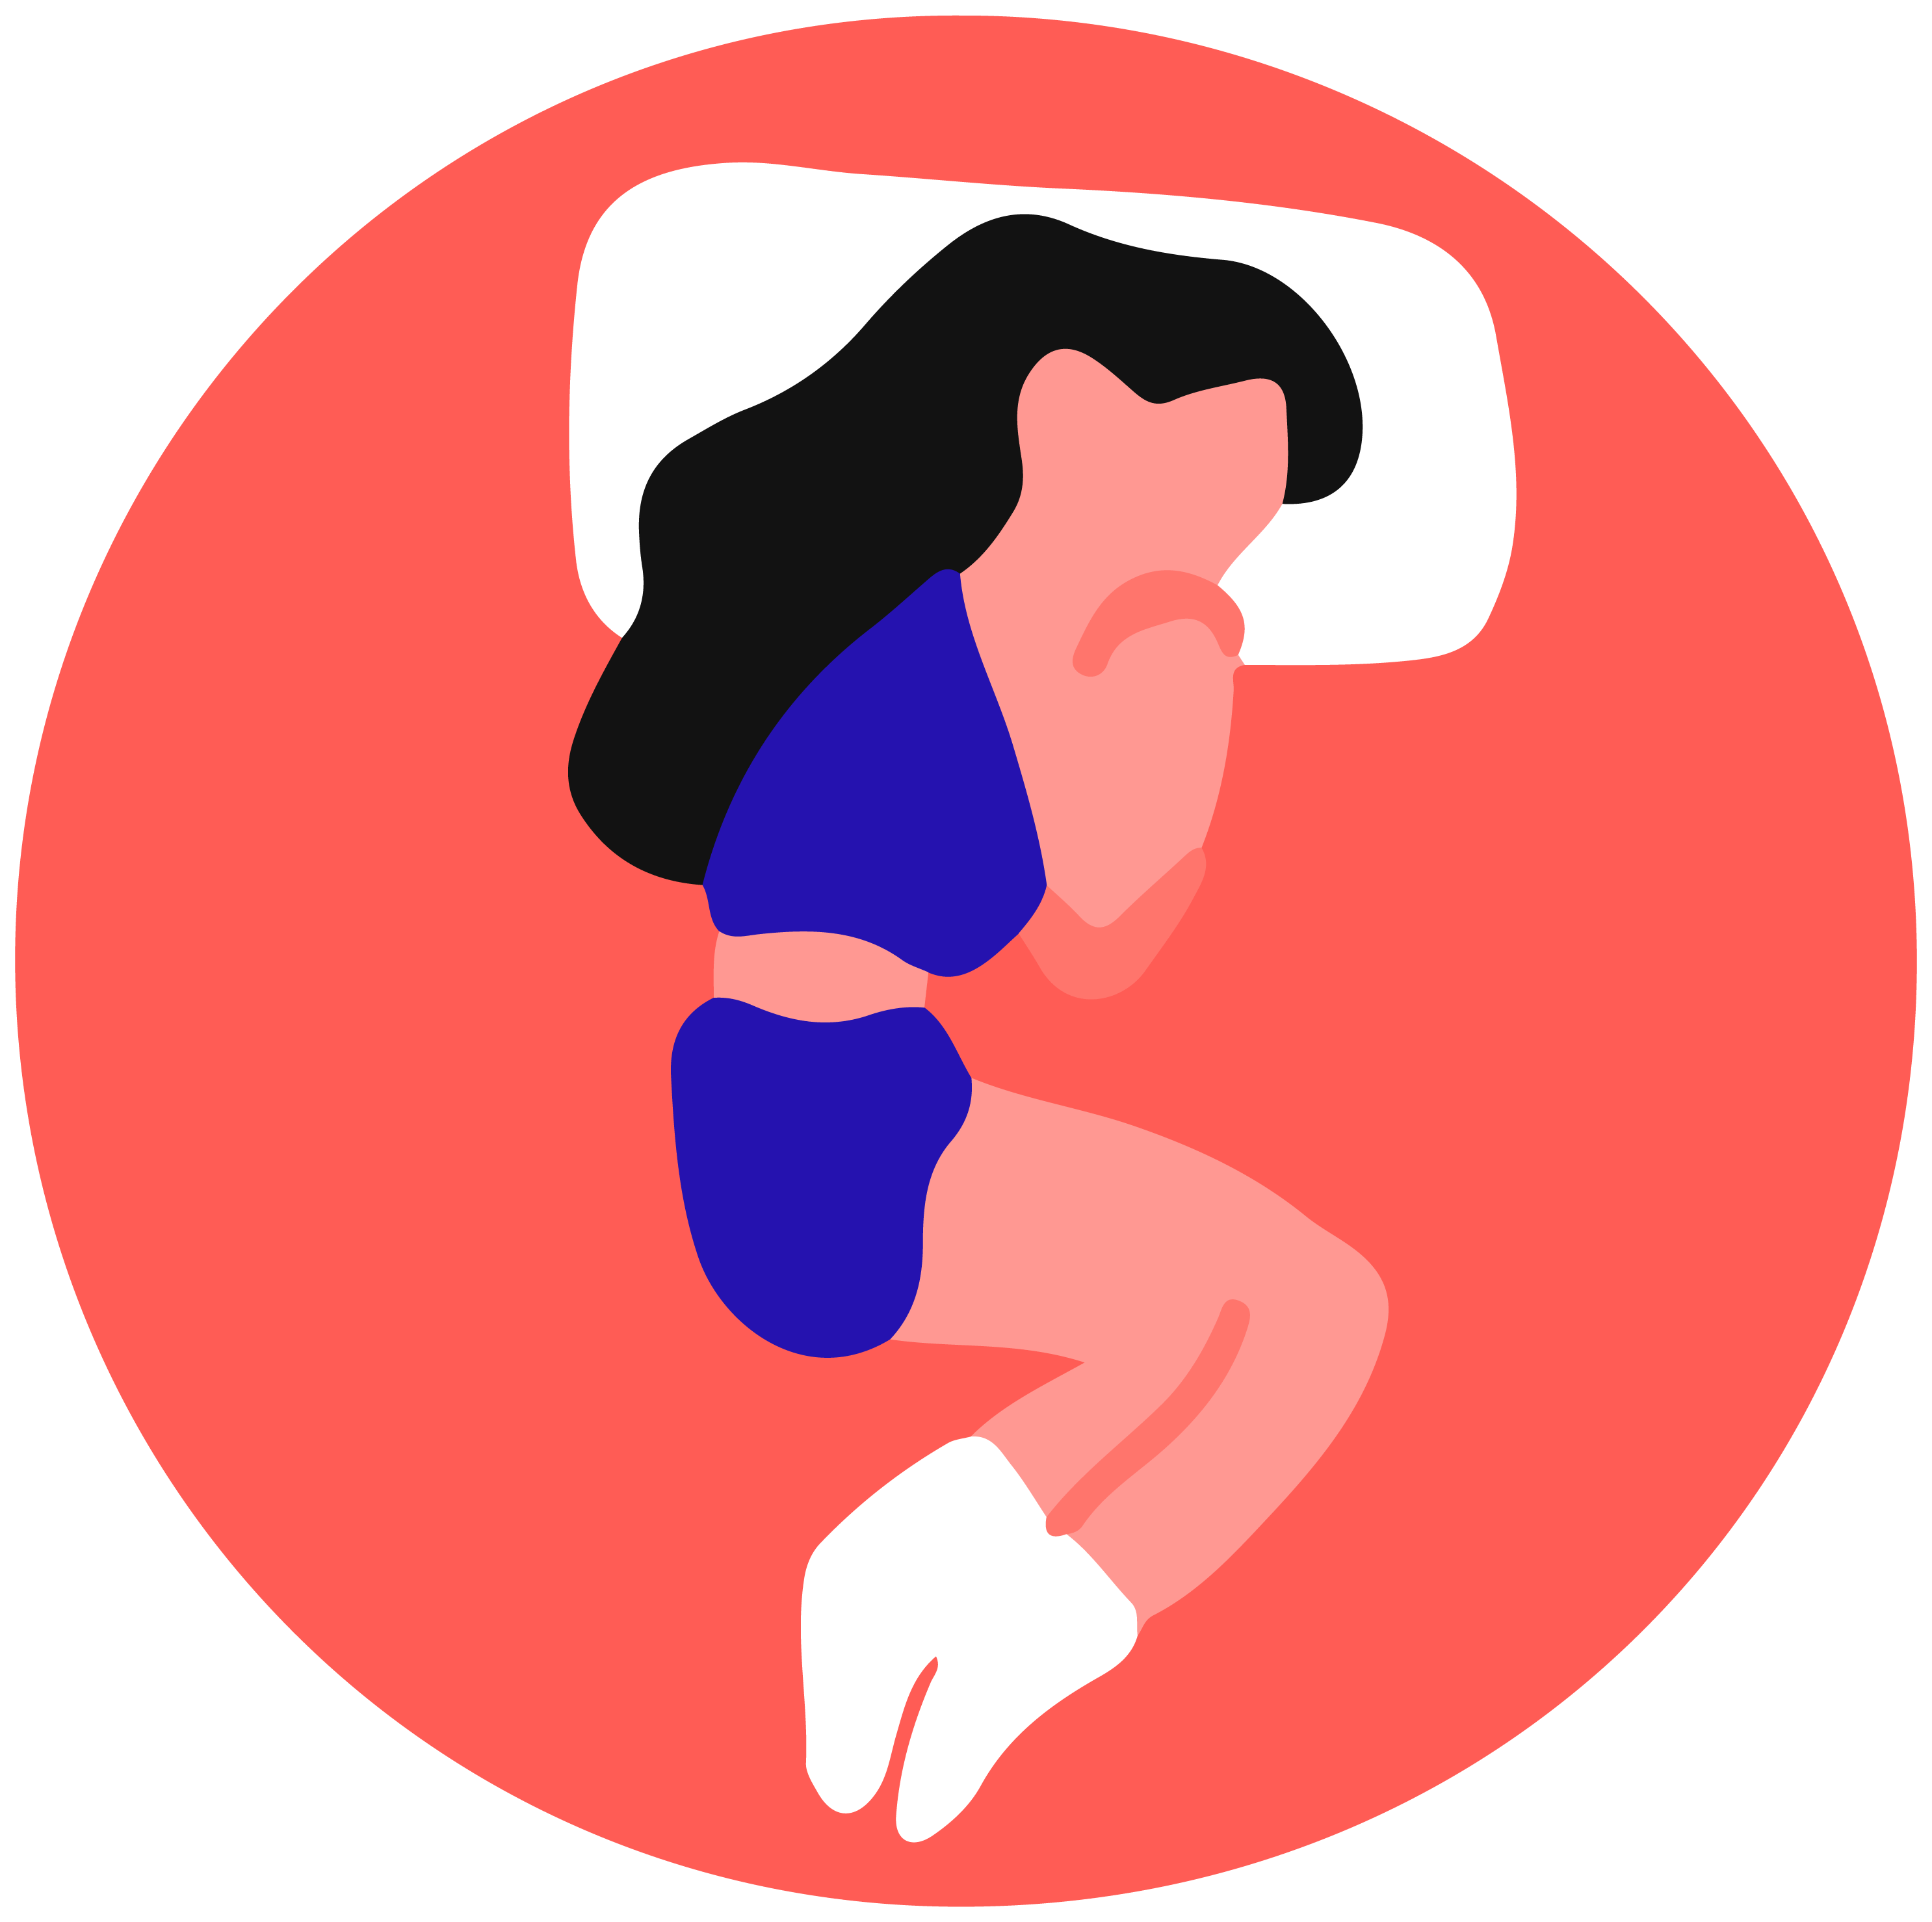 A crescent moon.Fetal position sleeping demonstrated by a female lying on her side with her knees bent to her chest.